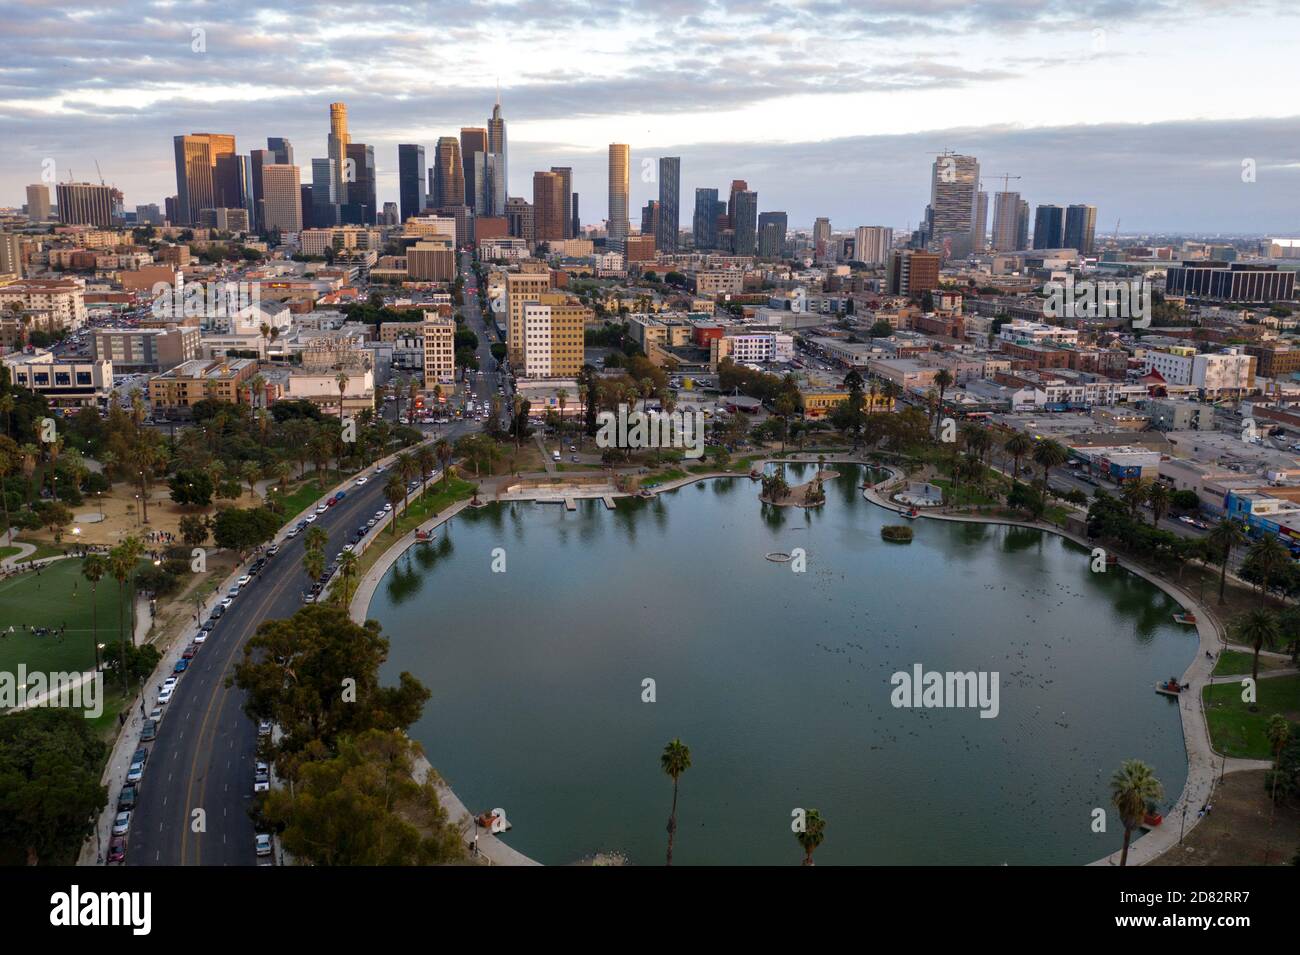 Aerial view over MacArthur Park lake near downtown Los Angeles, California Stock Photo